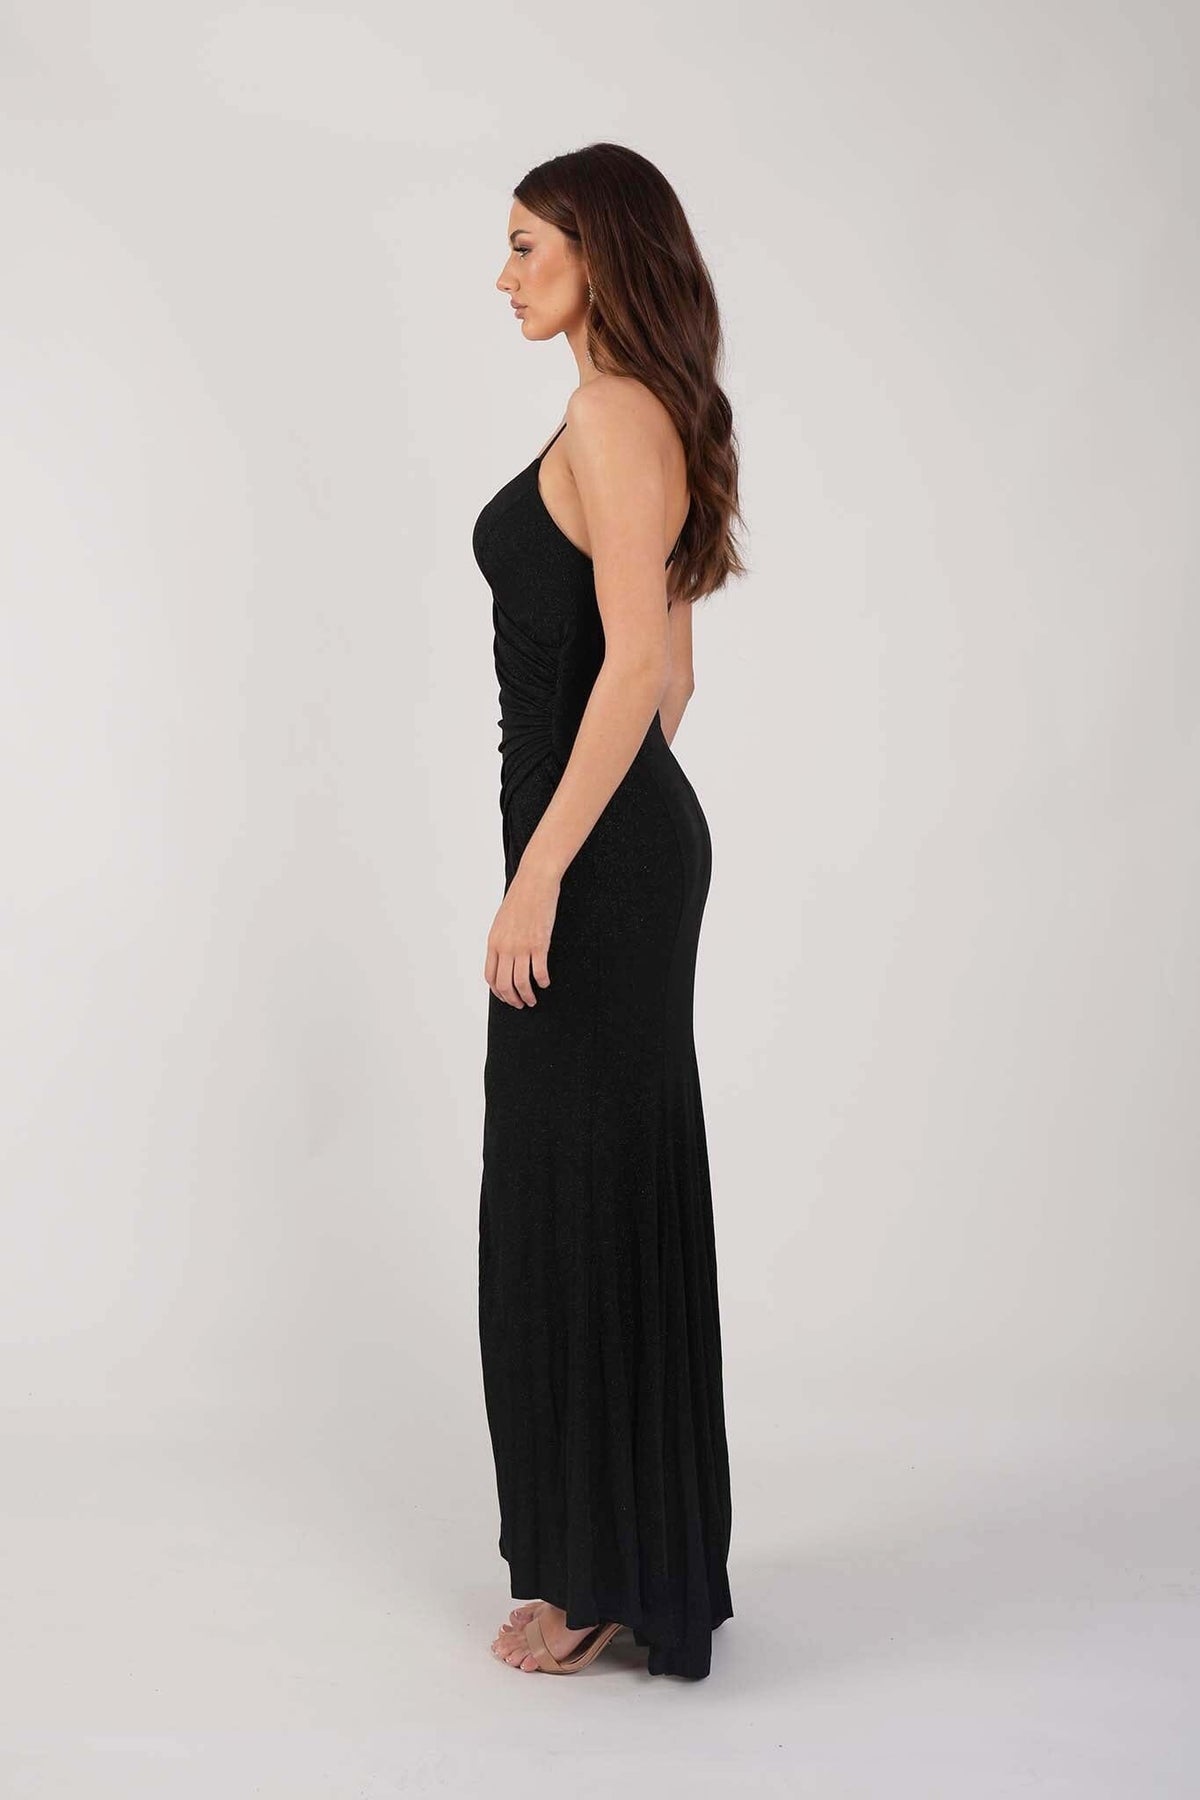 Side Image of Black Shimmer Fitted Maxi Dress with Thin Shoulder Straps, Gathered Detail at Waist and Leg Slit